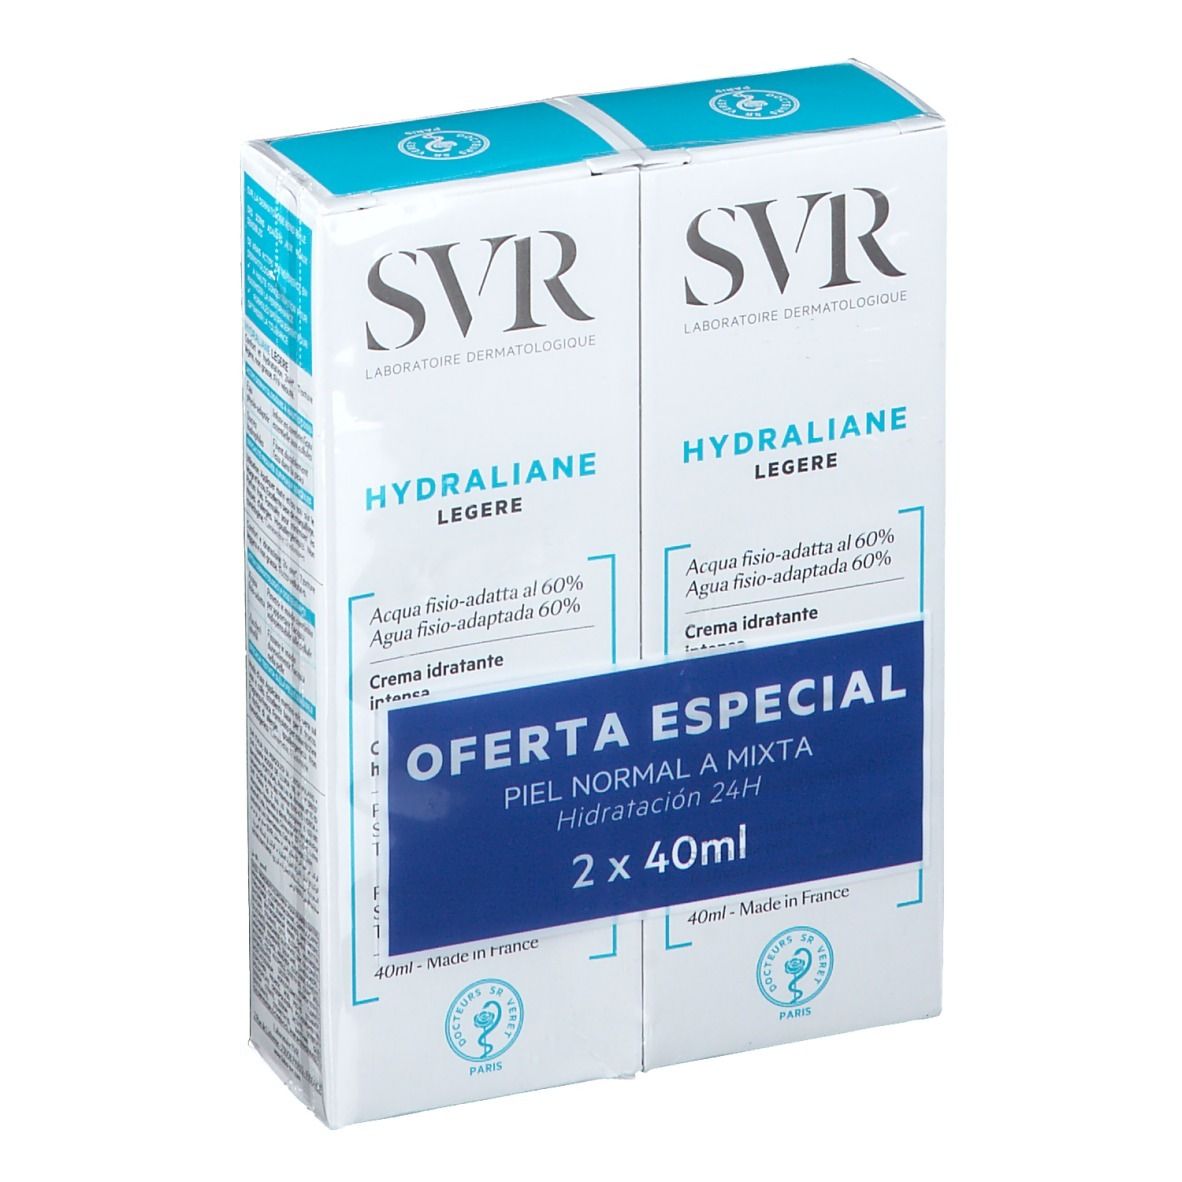 SVR Hydralaine legere Duopack